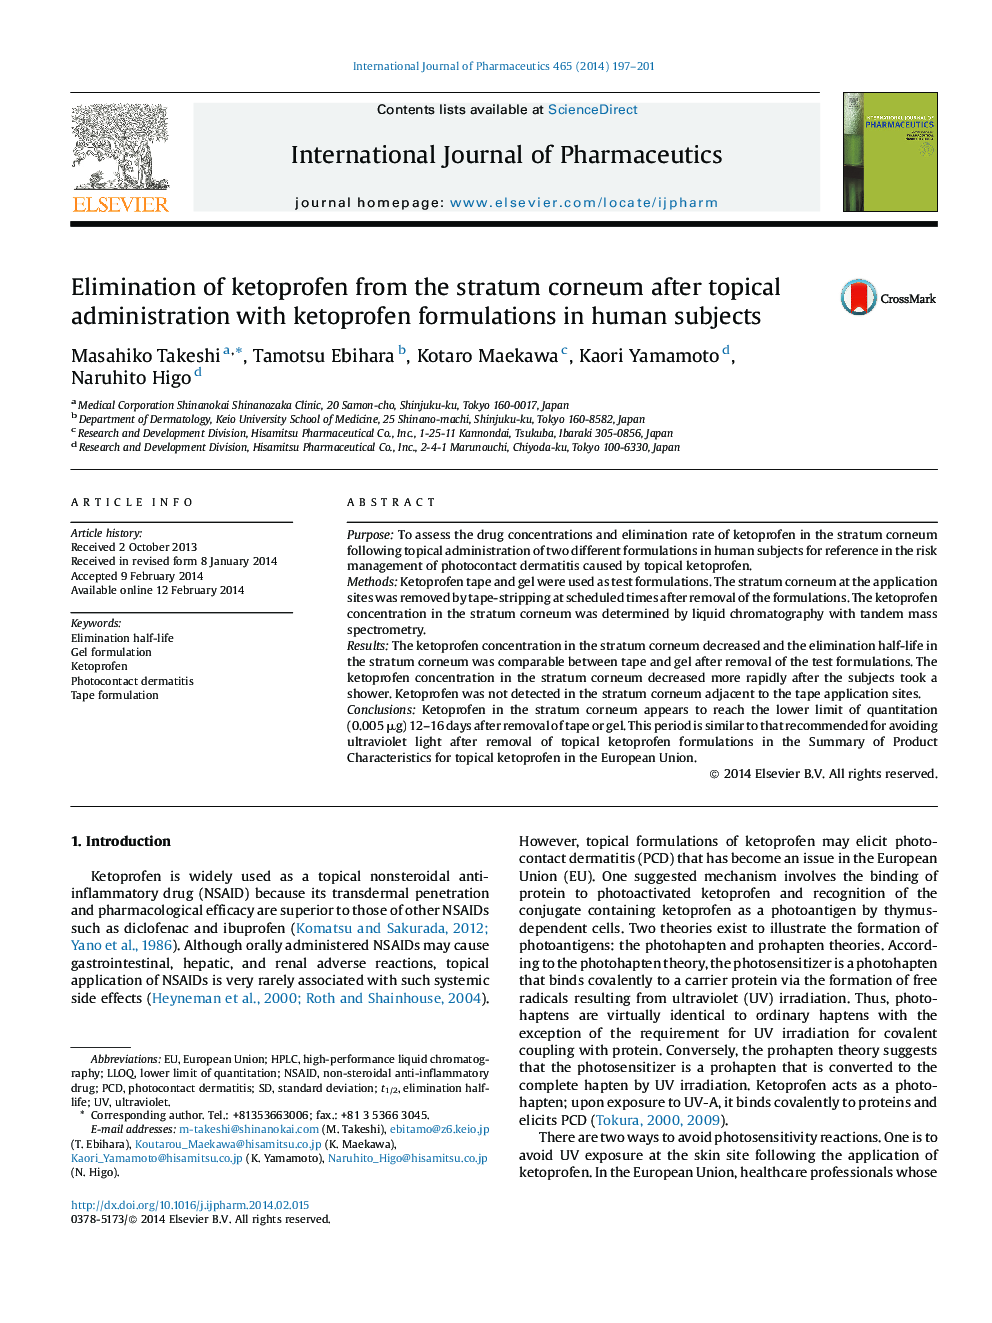 Elimination of ketoprofen from the stratum corneum after topical administration with ketoprofen formulations in human subjects